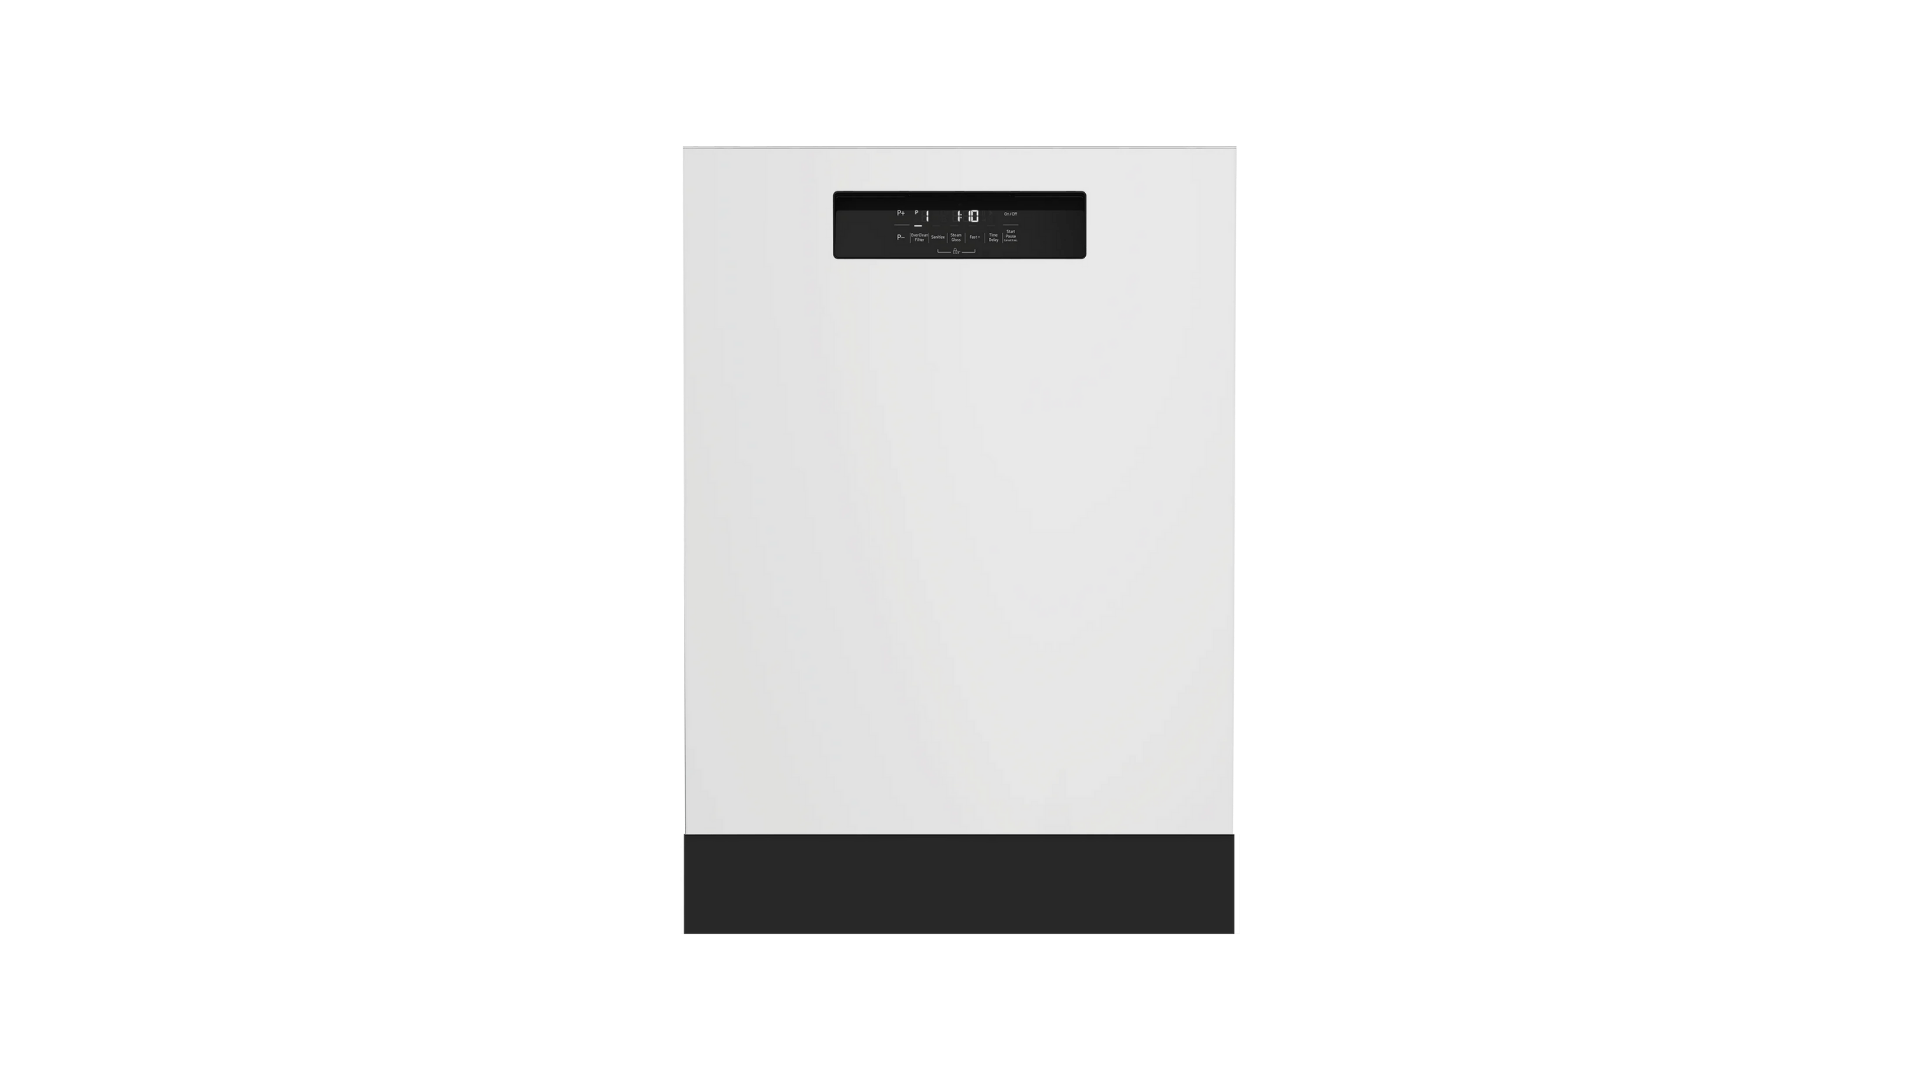 Tall Tub Dishwasher with (15 place settings, 45.0)